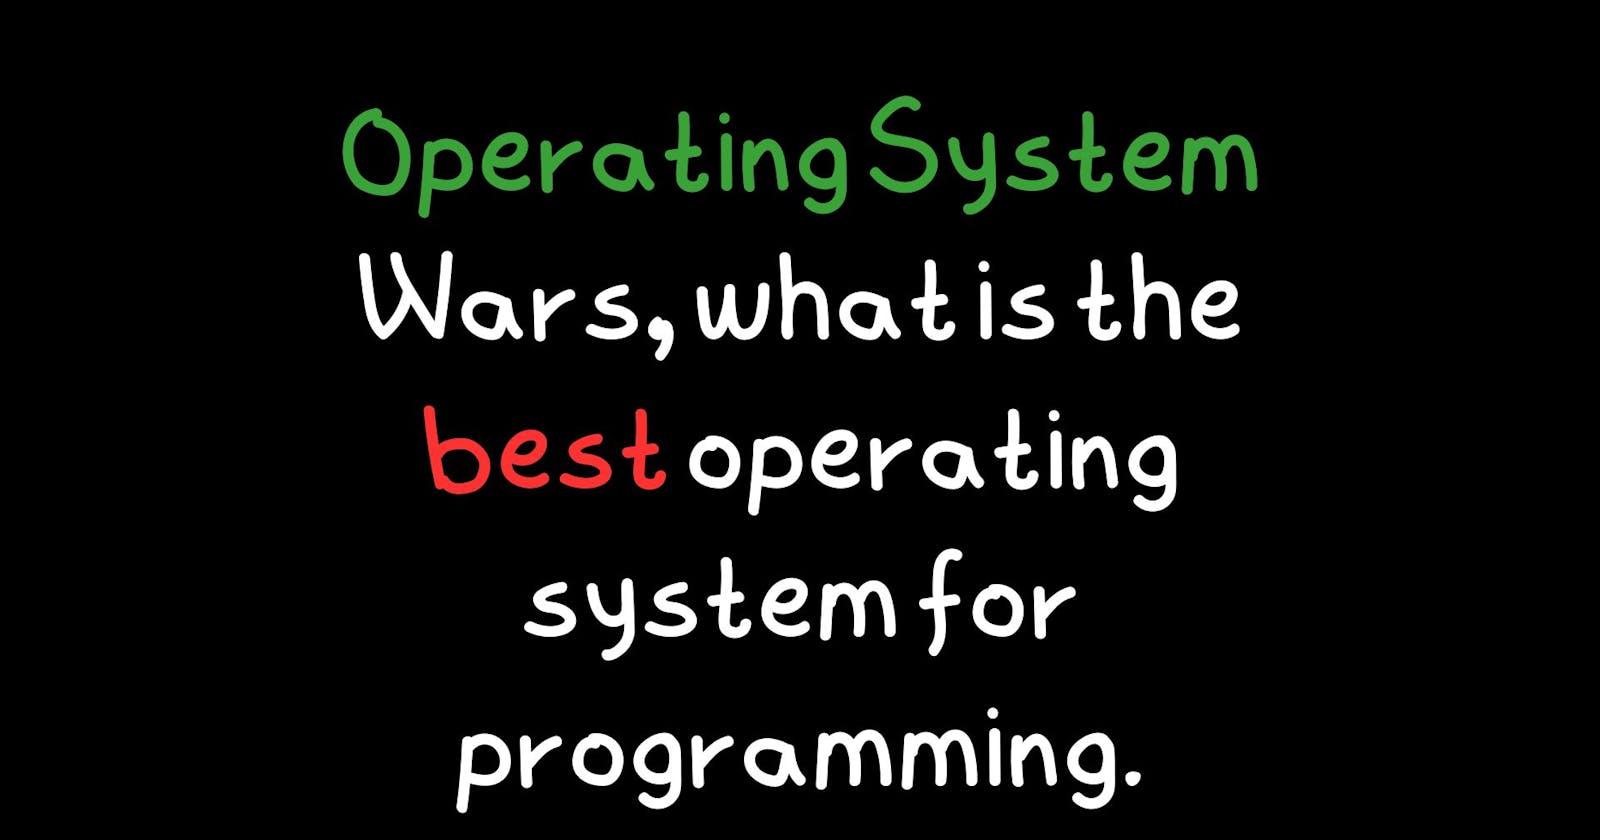 Operating System Wars, what is the best operating system for programming.